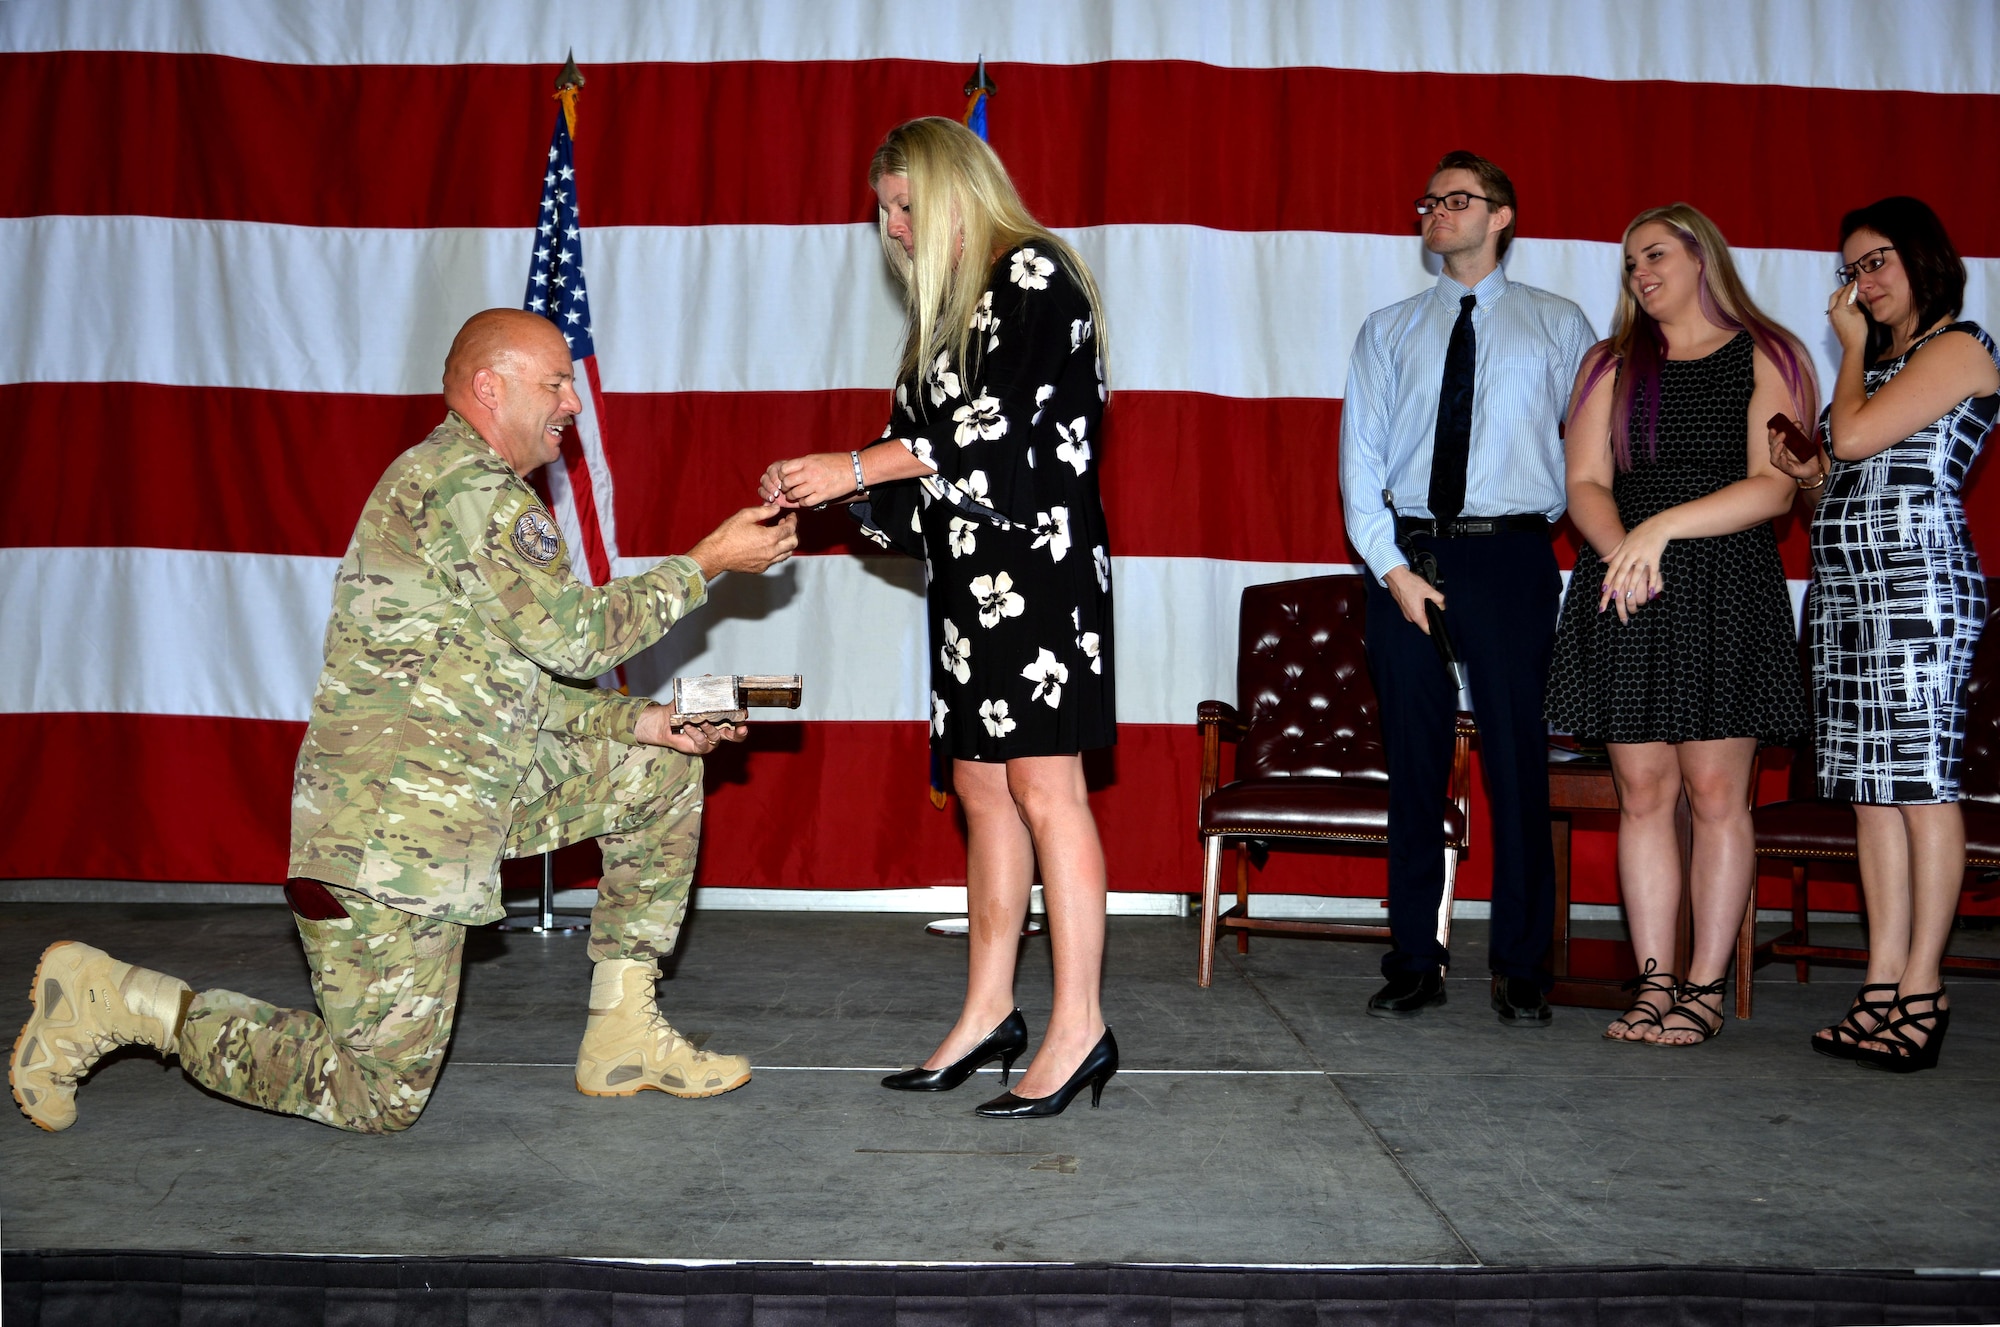 Chief Master Sgt. Robert Bean, USAF (ret.), presents his wife Jenny with a diamond ring during his retirement ceremony July 20 here. Bean, who served his final tour at Kirtland as the Commandant of the 351st Battlefield Airmen Training Squadron, also arranged for he and his wife to renew their vows on the spot during the ceremony. His children (left to right) Corey, Cailey and Christina witnessed the surprise proposal. He was showered with accolades from his Pararescue comrades and a grateful Air Force. (U.S. Air Force photo by Todd Berenger)